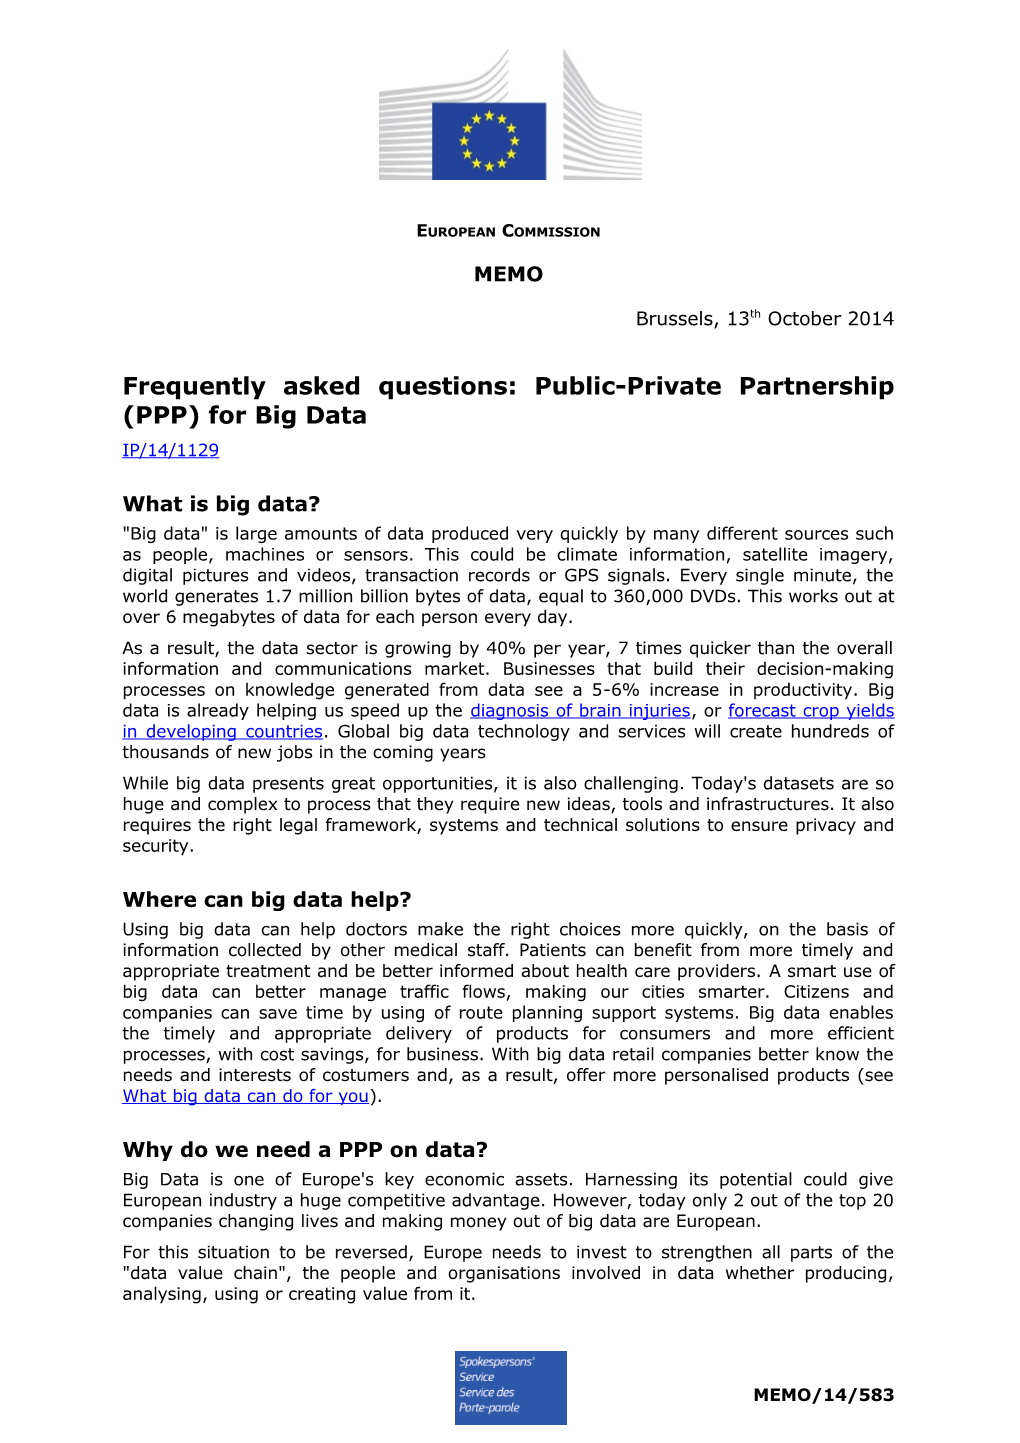 Frequently Asked Questions: Public-Private Partnership (PPP) for Big Data